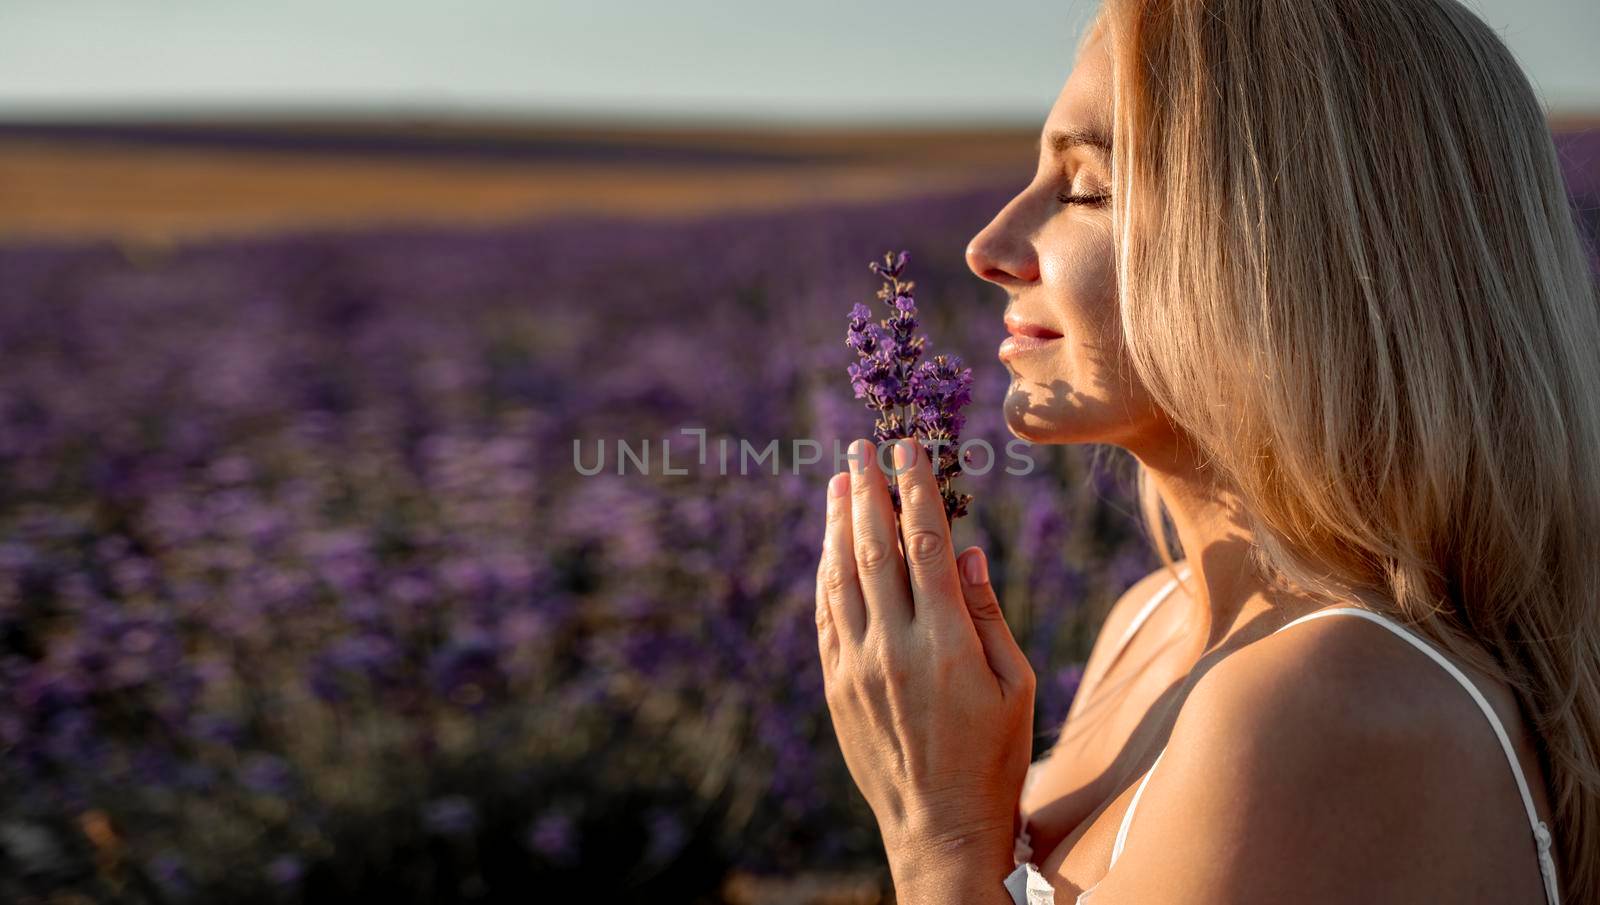 Beautiful blonde is in the field of lavender, holds a bouquet of flowers and enjoys aromatherapy. The girl's eyes are closed. The concept of aromatherapy, lavender oil, photo shoot in lavender by Matiunina